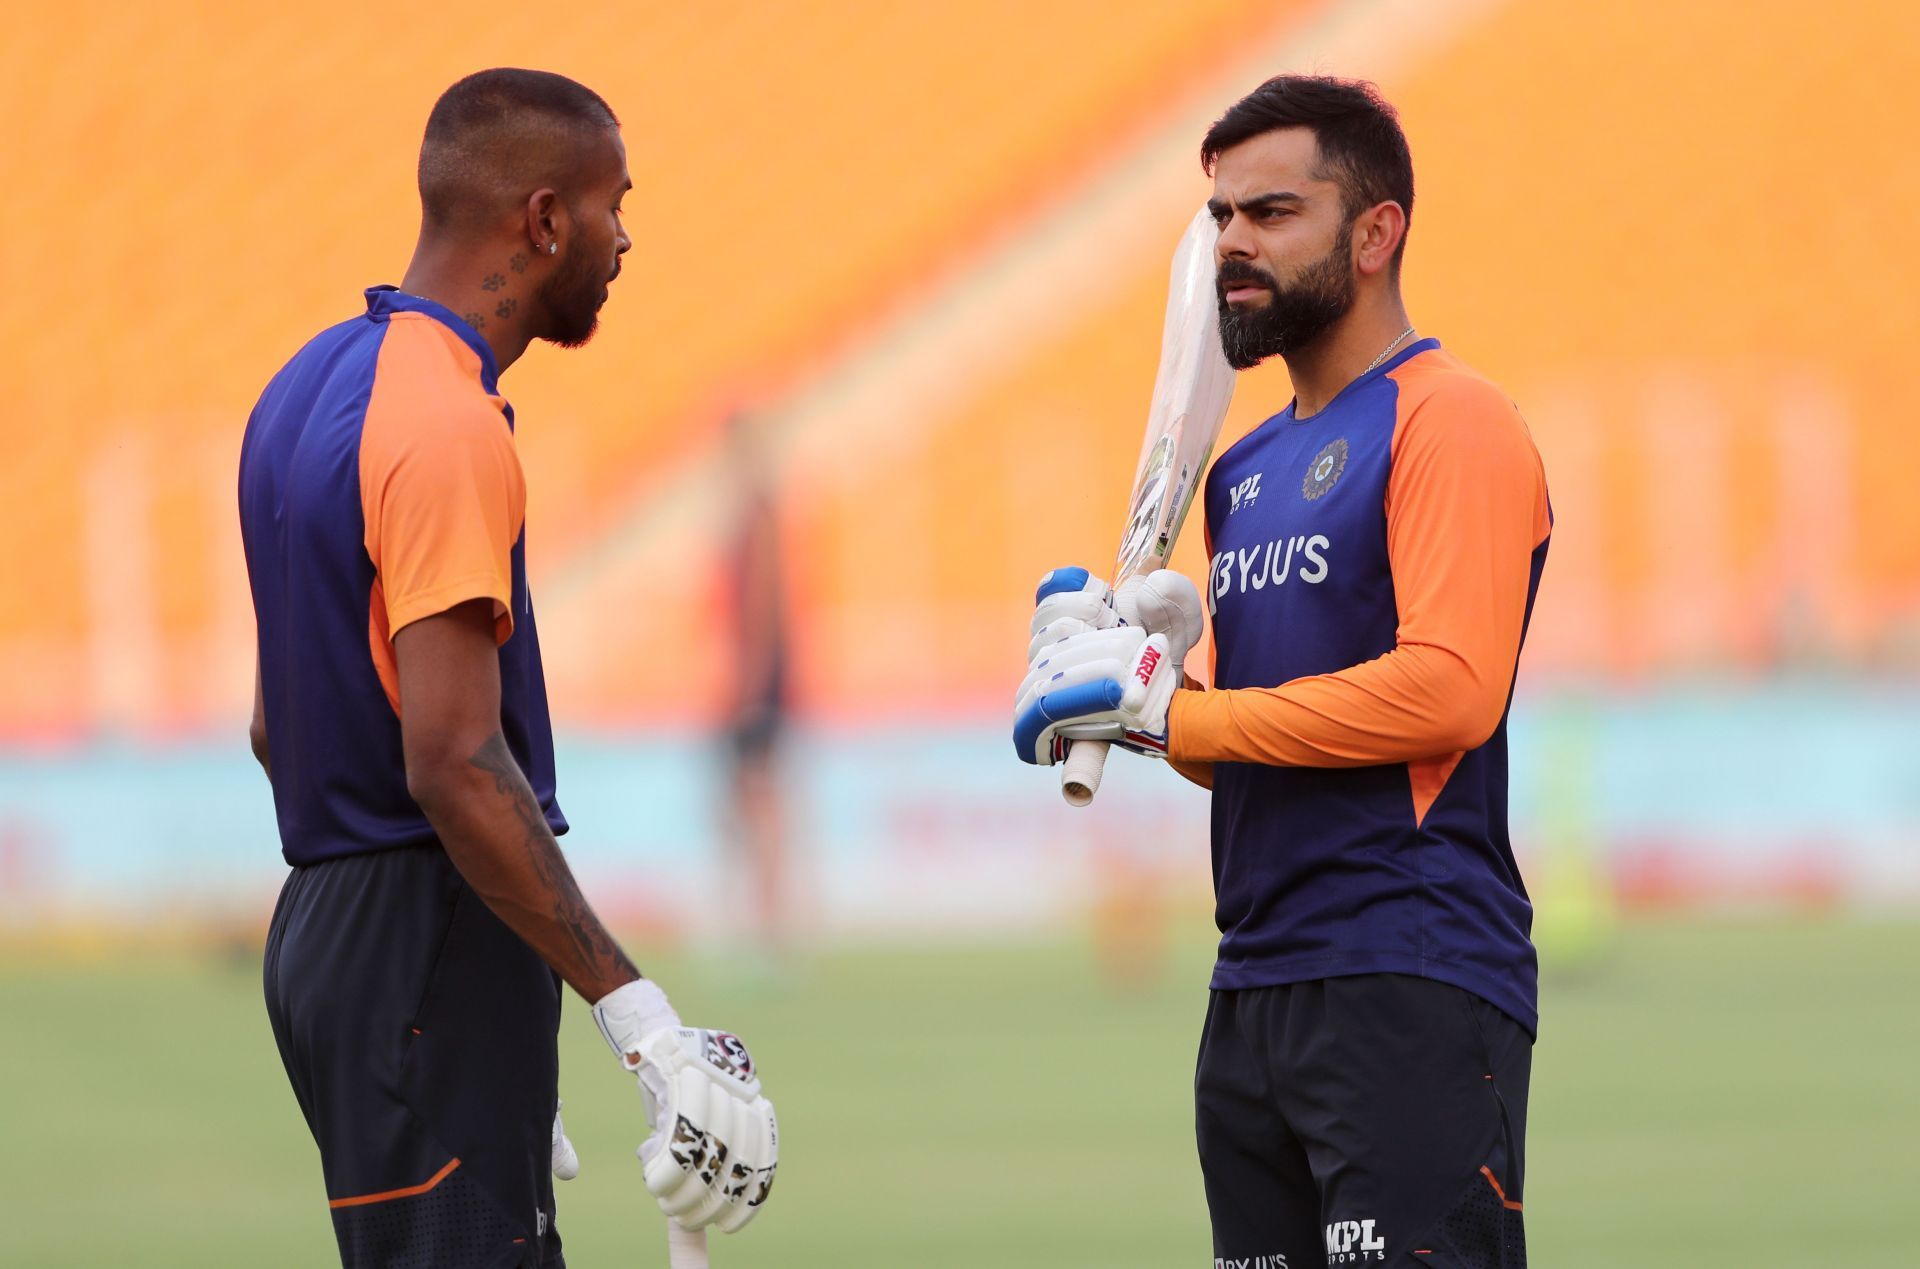 Virat Kohli and Hardik Pandya are two of the best players in the Indian squad right now. (Image: Getty)